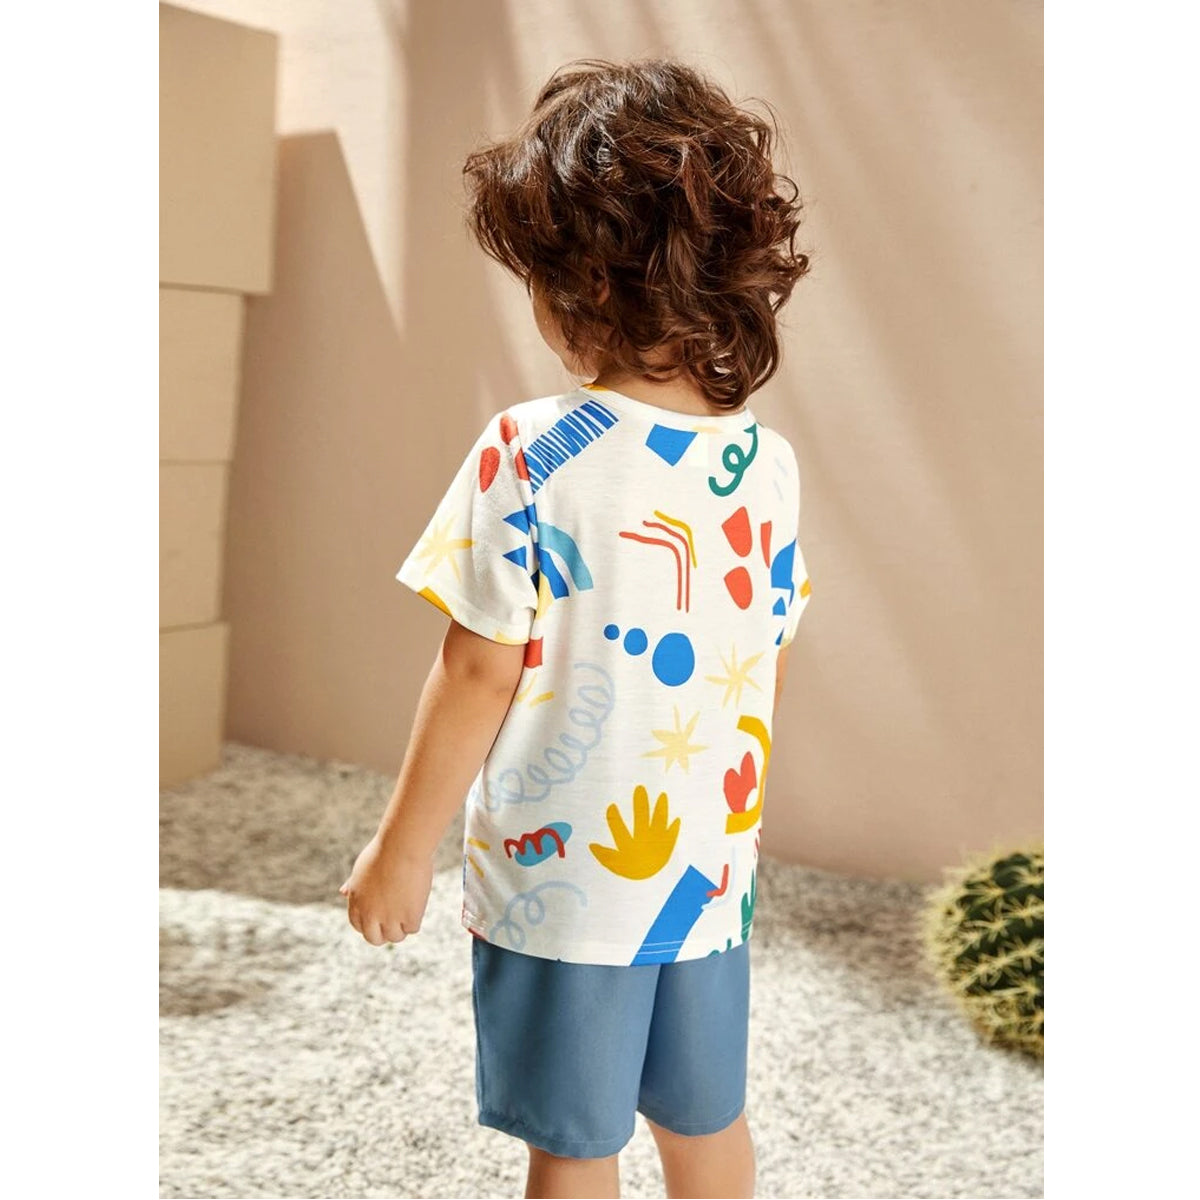 VENUTALOZA Boy's Letters Graphic & Cartoon Graphic (Combo Pack of 2) T-shirt For Boy's.